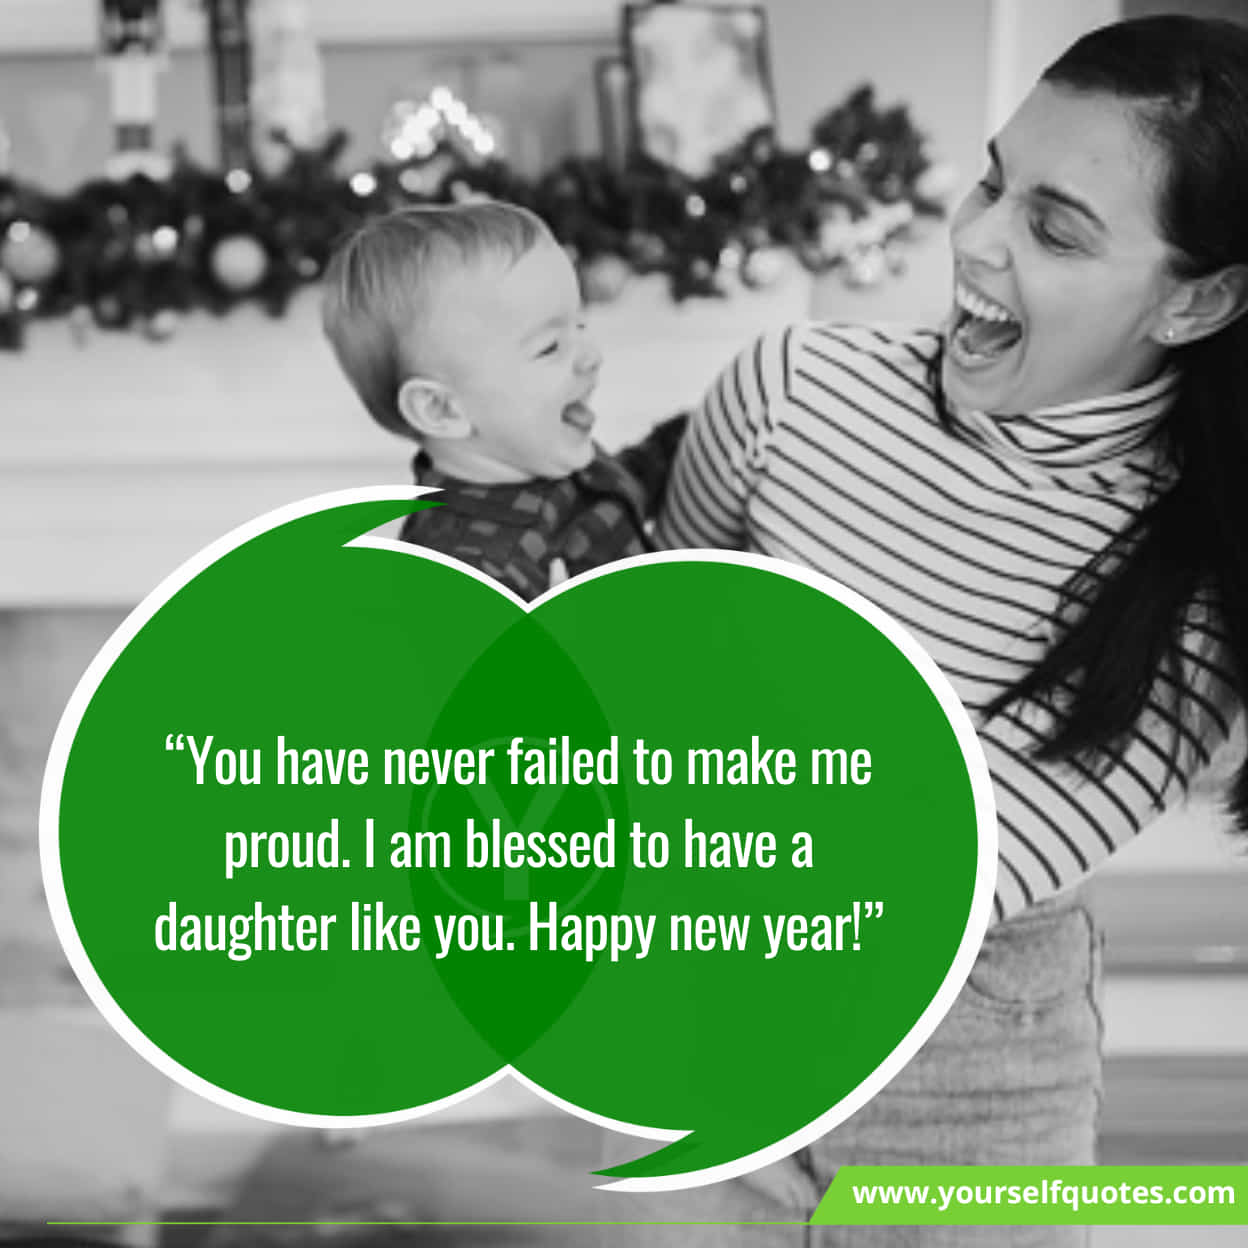 Best Inspiring Happy New Year Wishes For Daughter